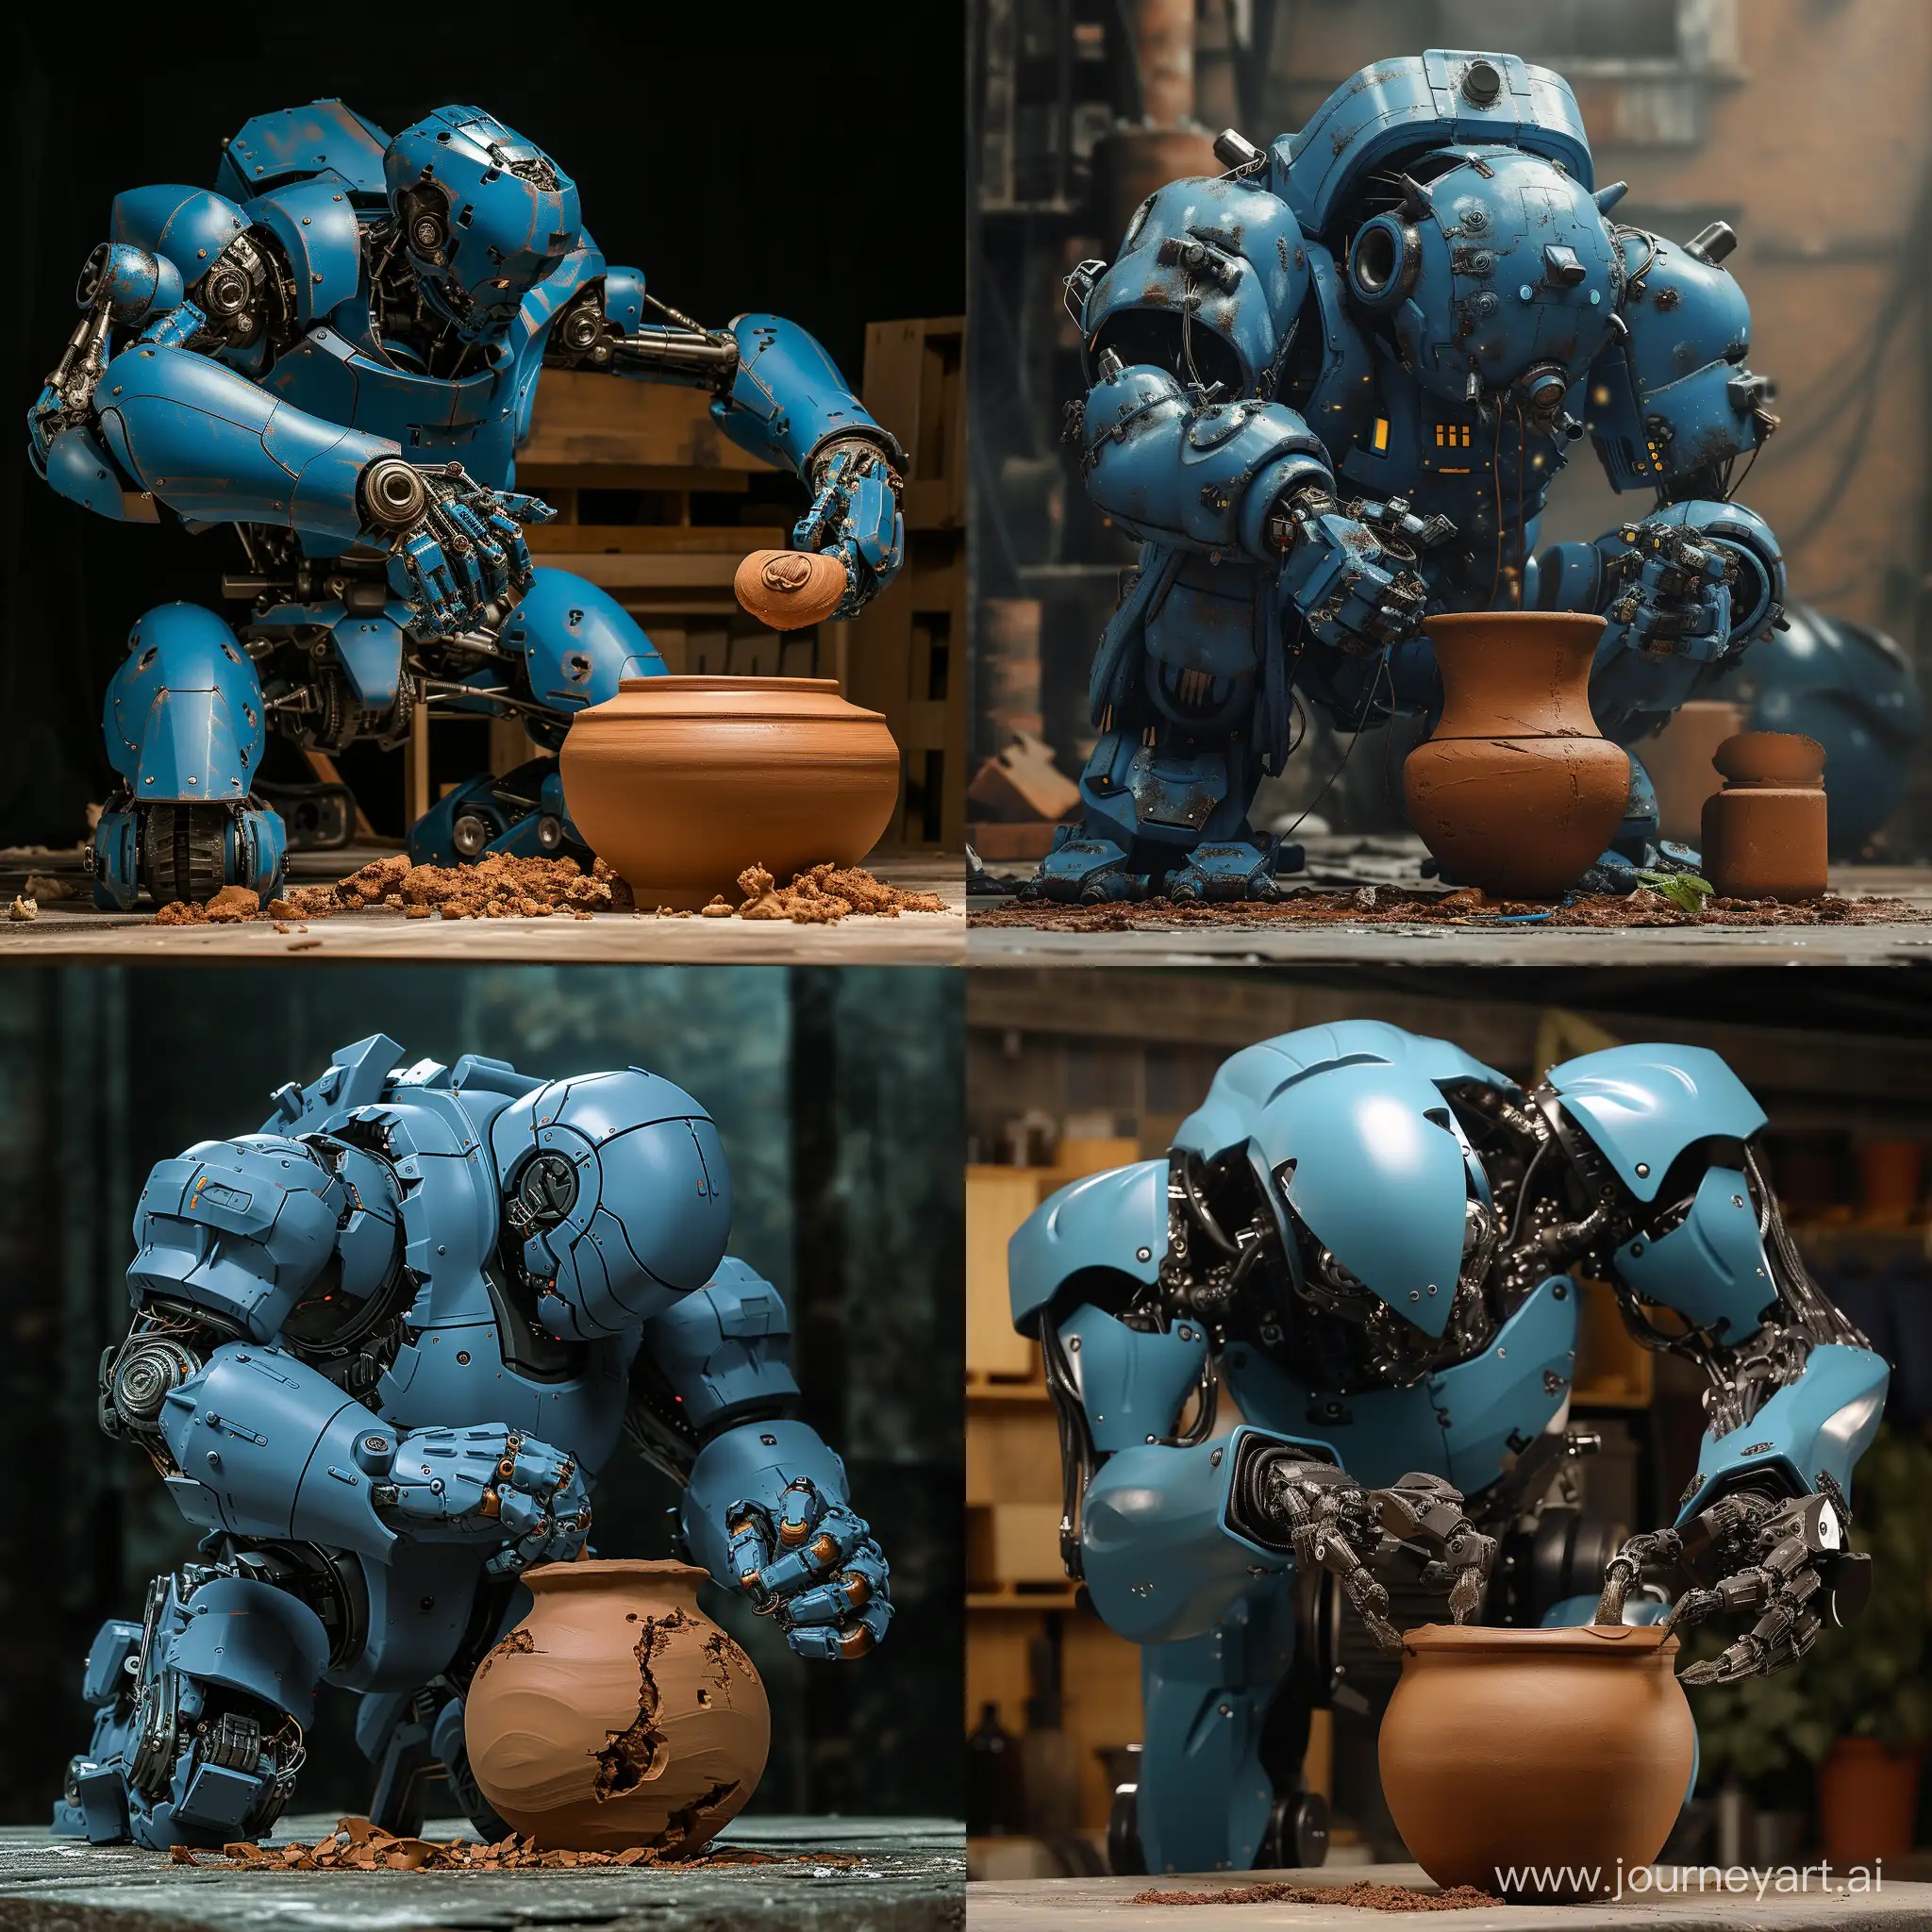 A large blue bulky robot carves a brown clay pot